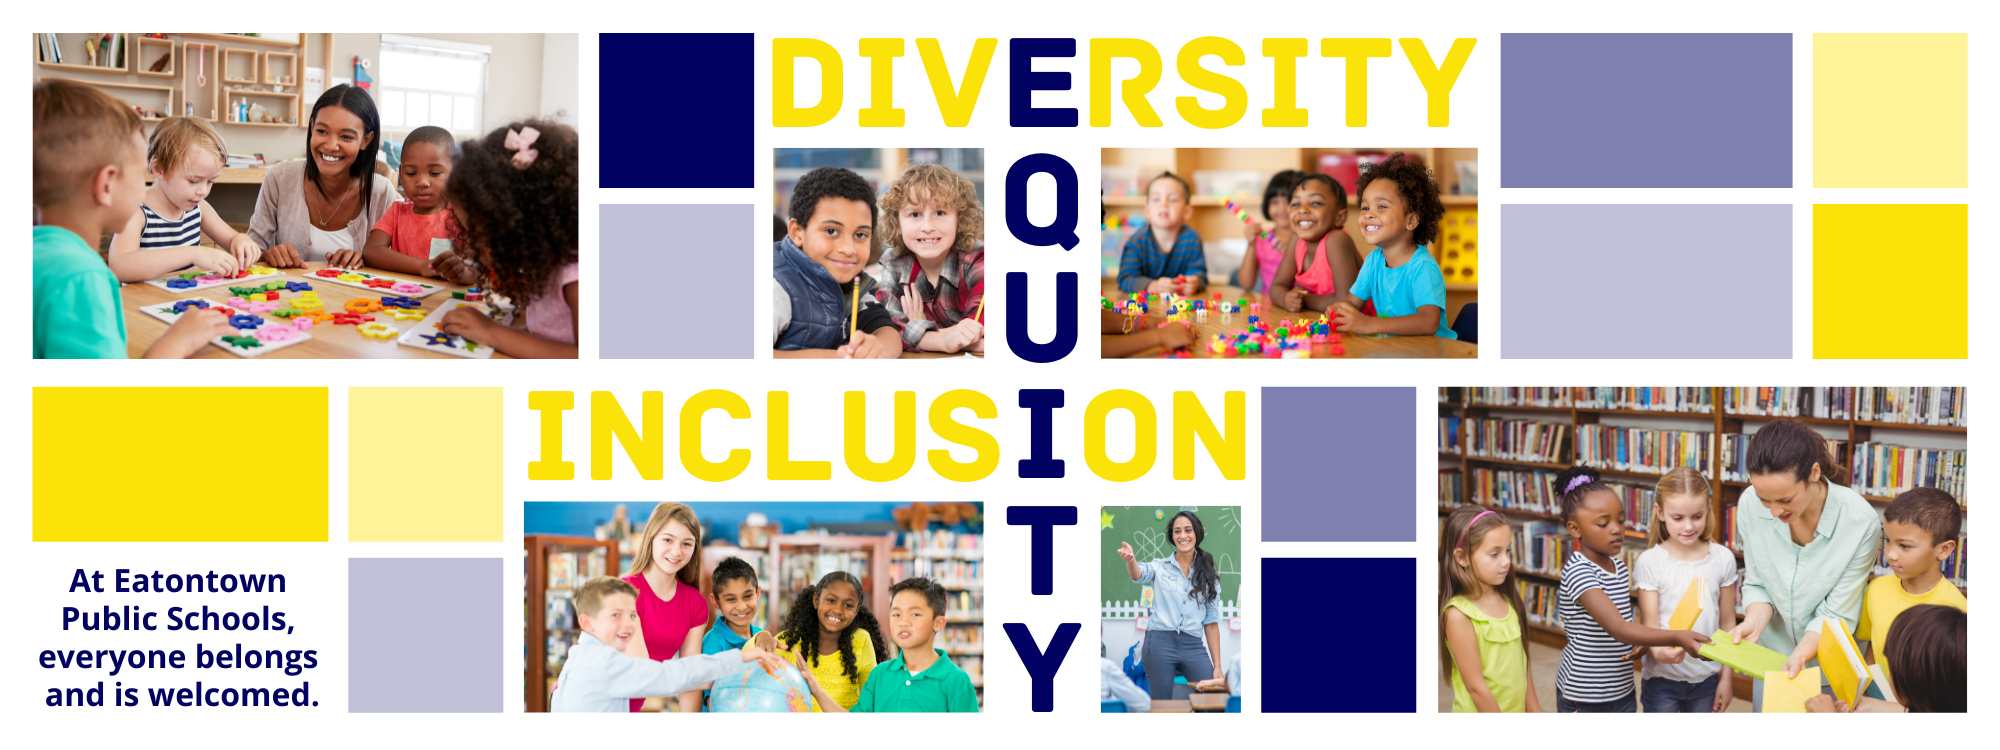 Diversity Equity Inclusion